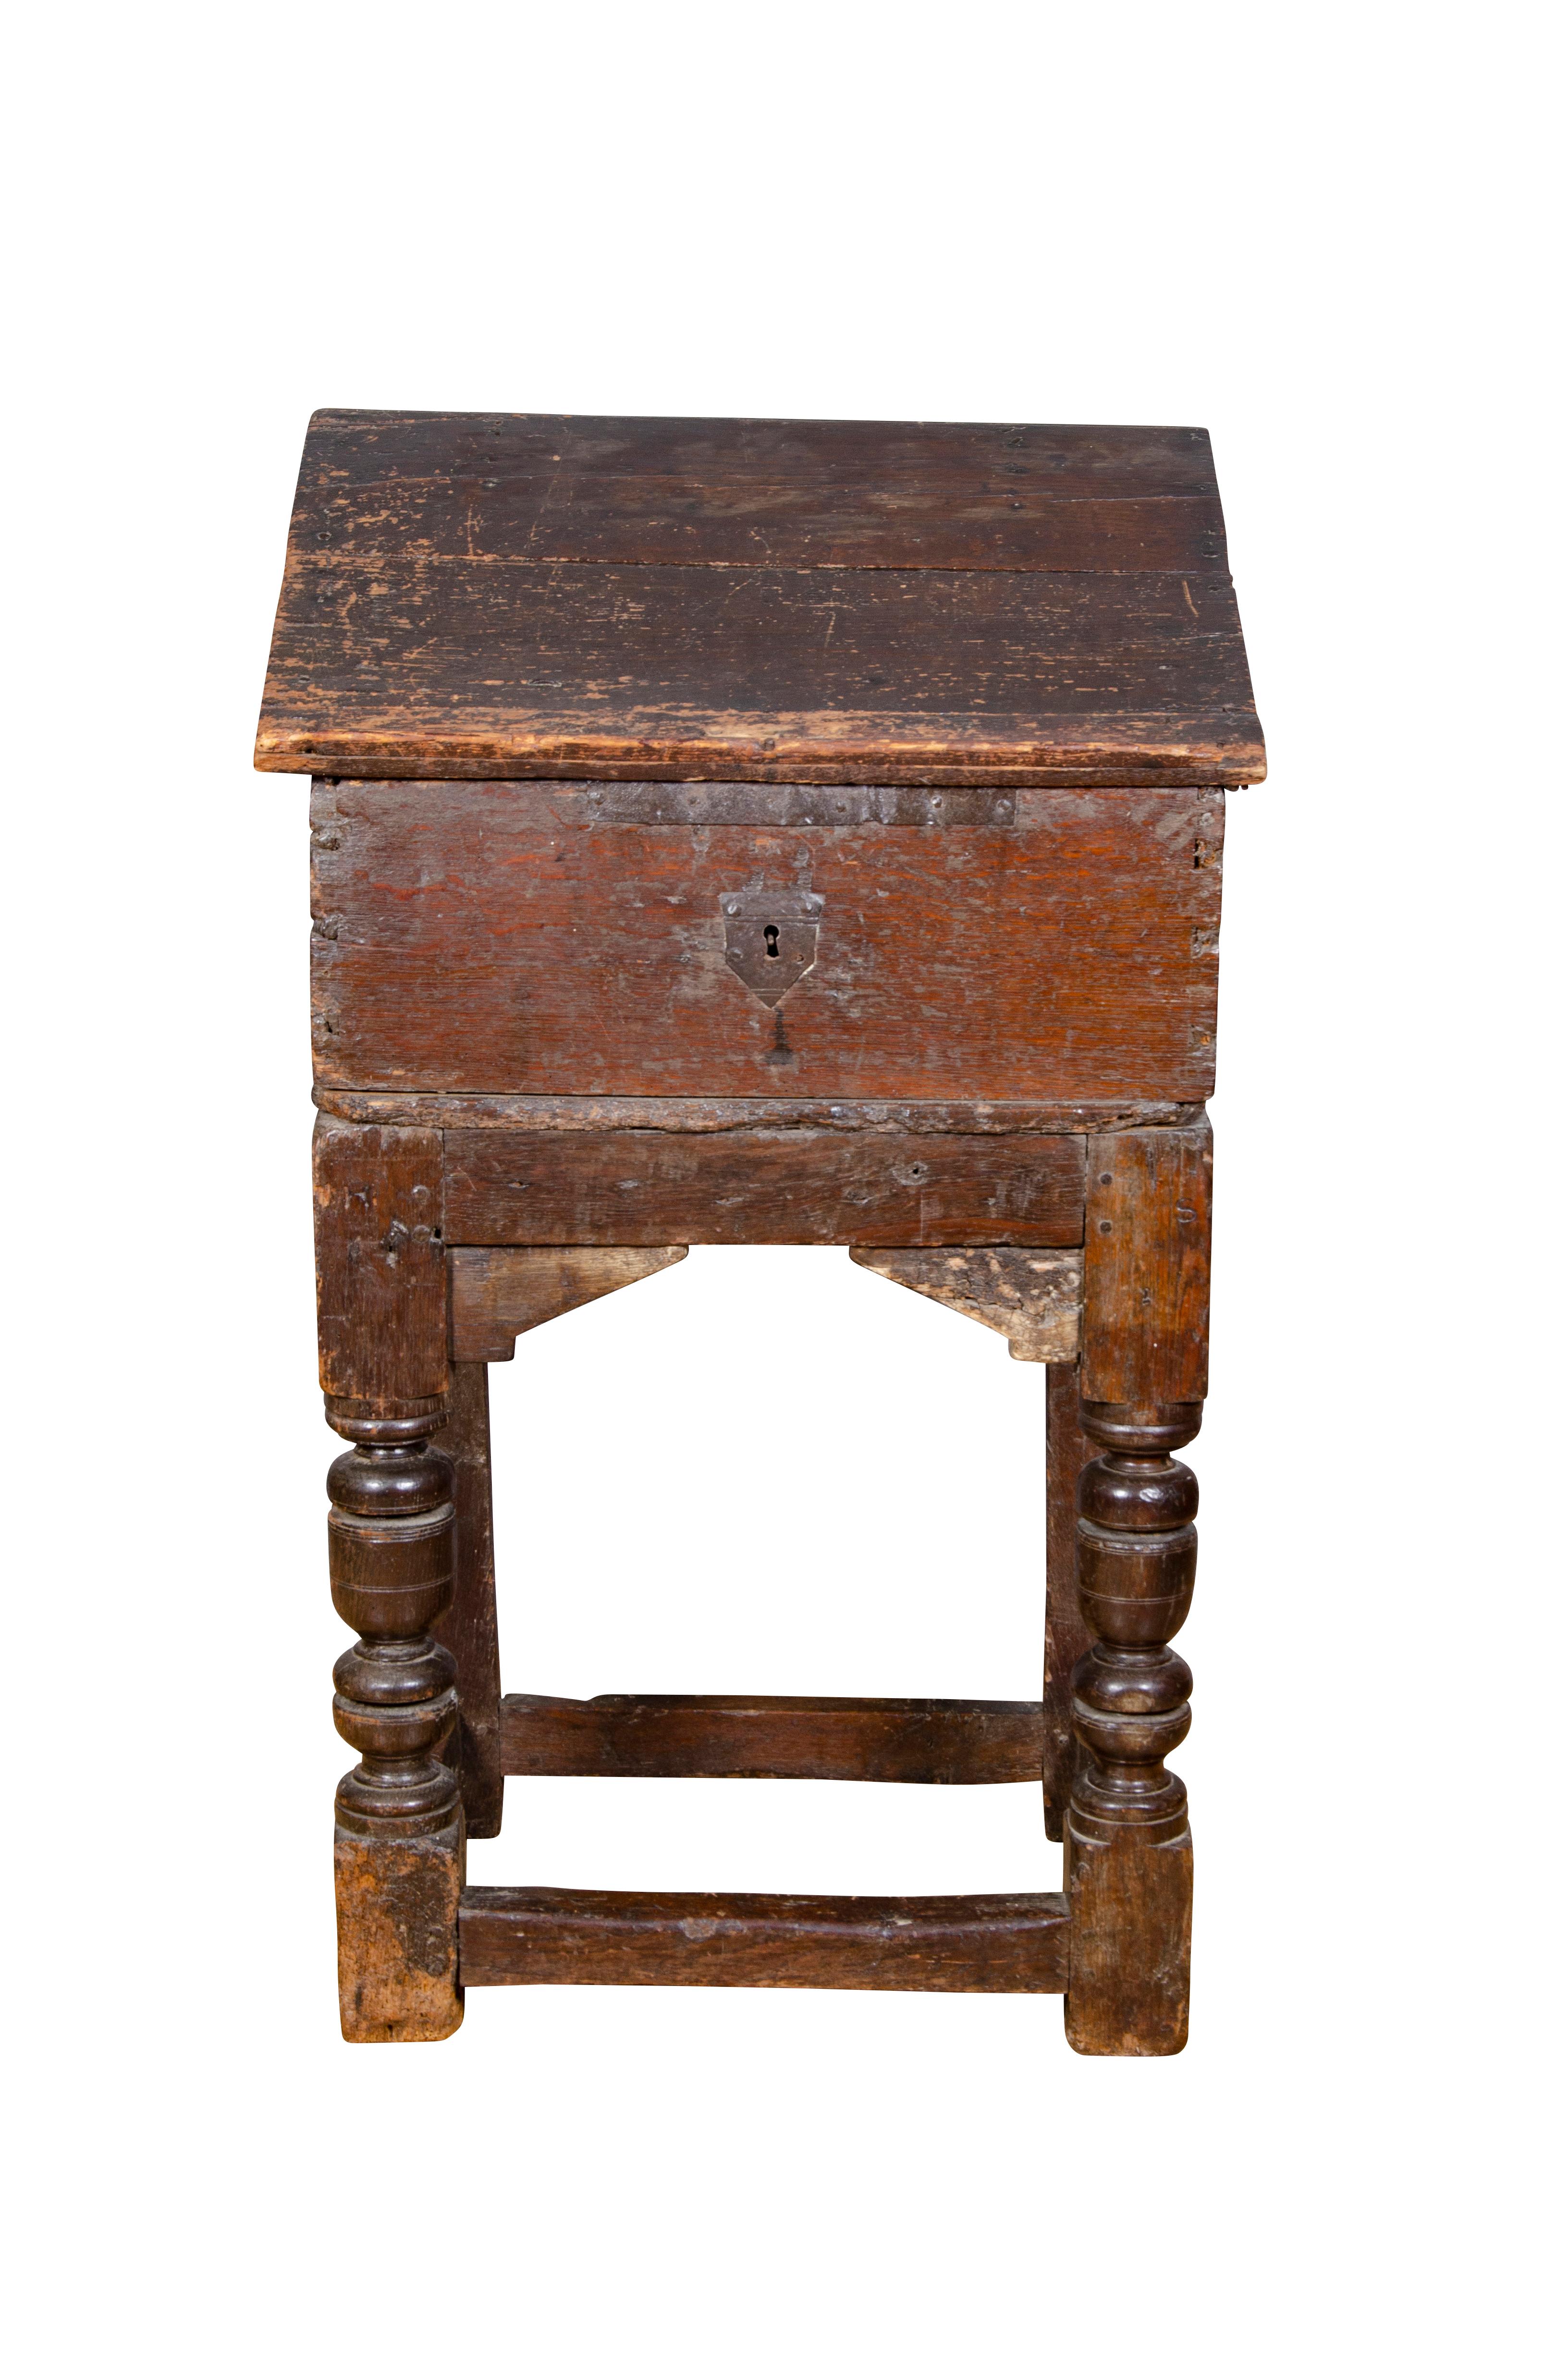 With a hinged slant lid opening to a compartment, raised on turned legs joined by a box stretcher. Provenance; J.P Morgan.